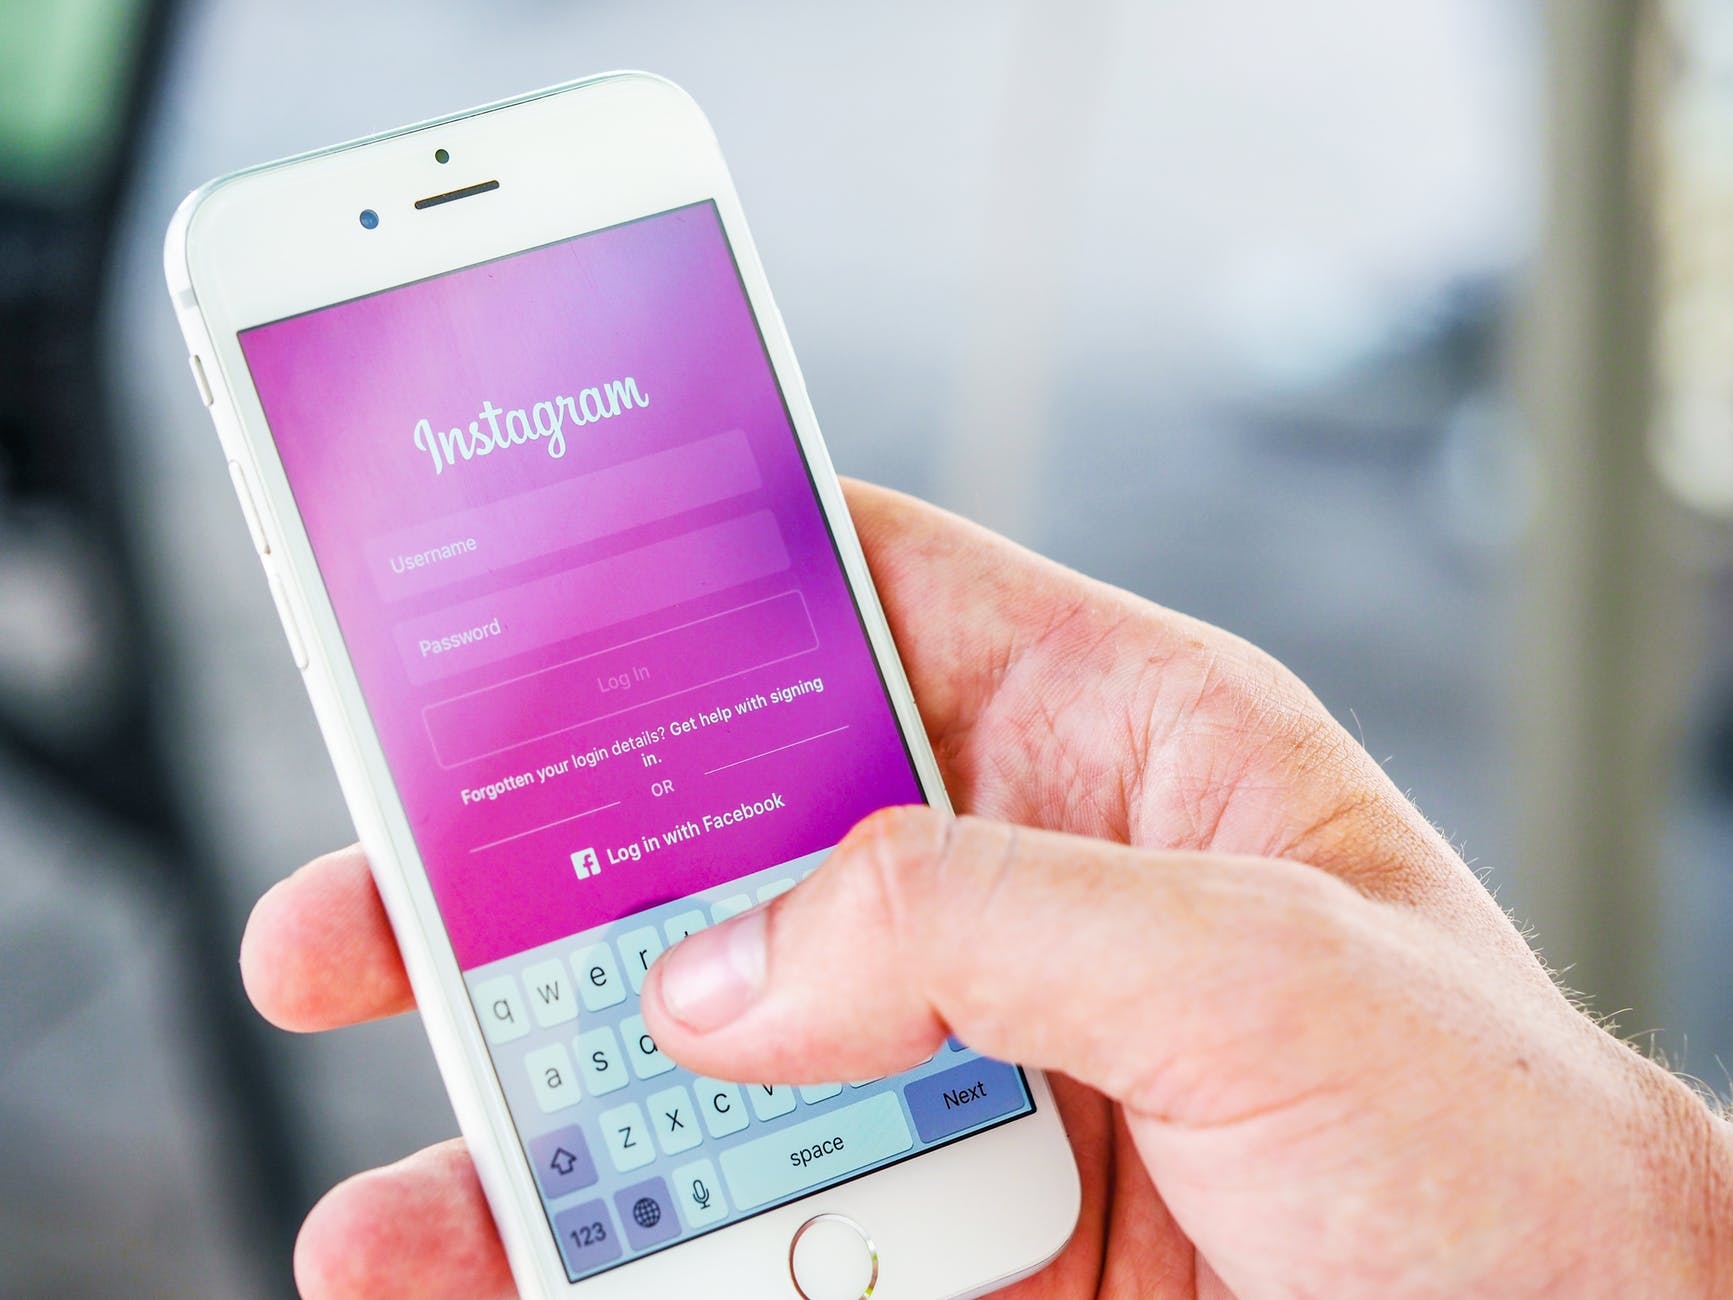 Brand-Building Tips On Using Instagram for Your Business